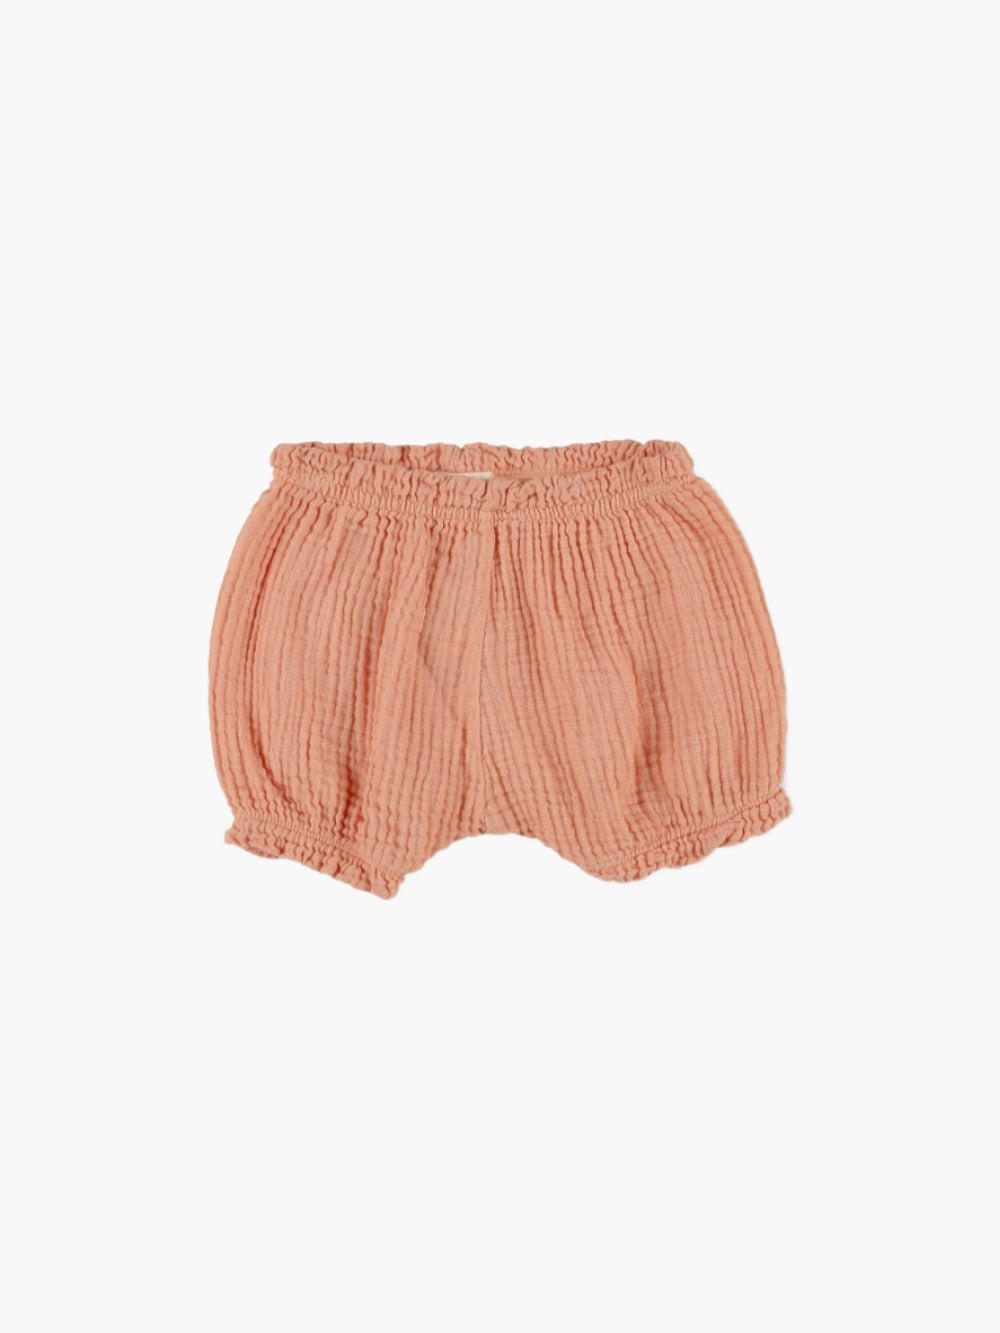 Pink Soft Gauze Baby Bloomers